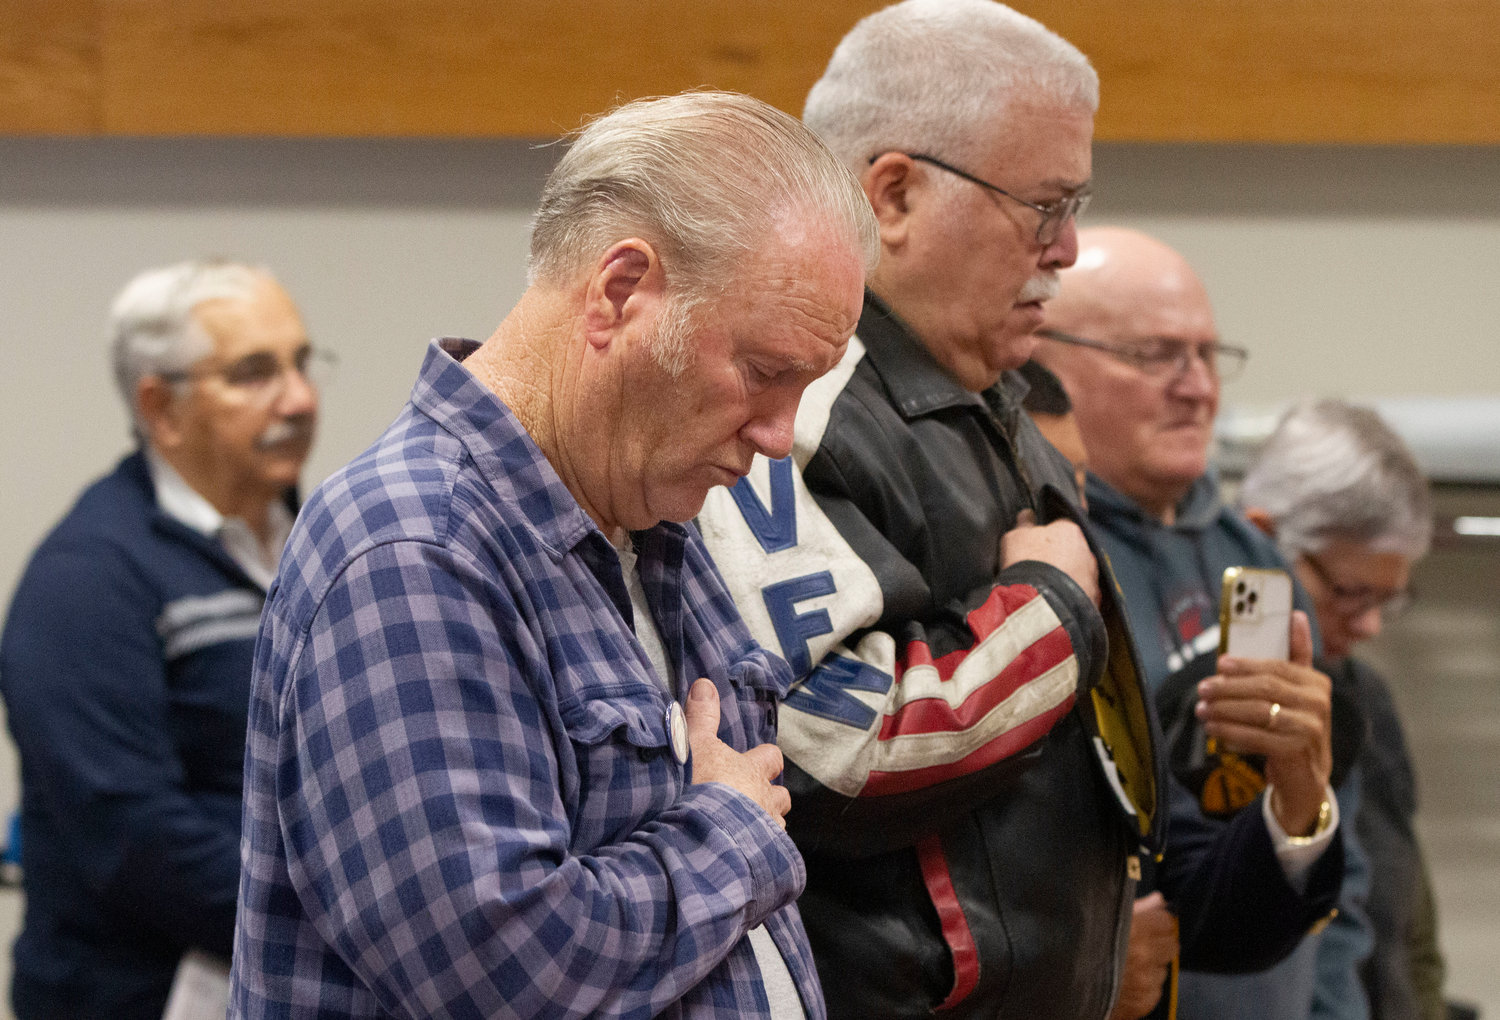 Retired Army veteran Donald Pfeiffer bows his head during the invocation.